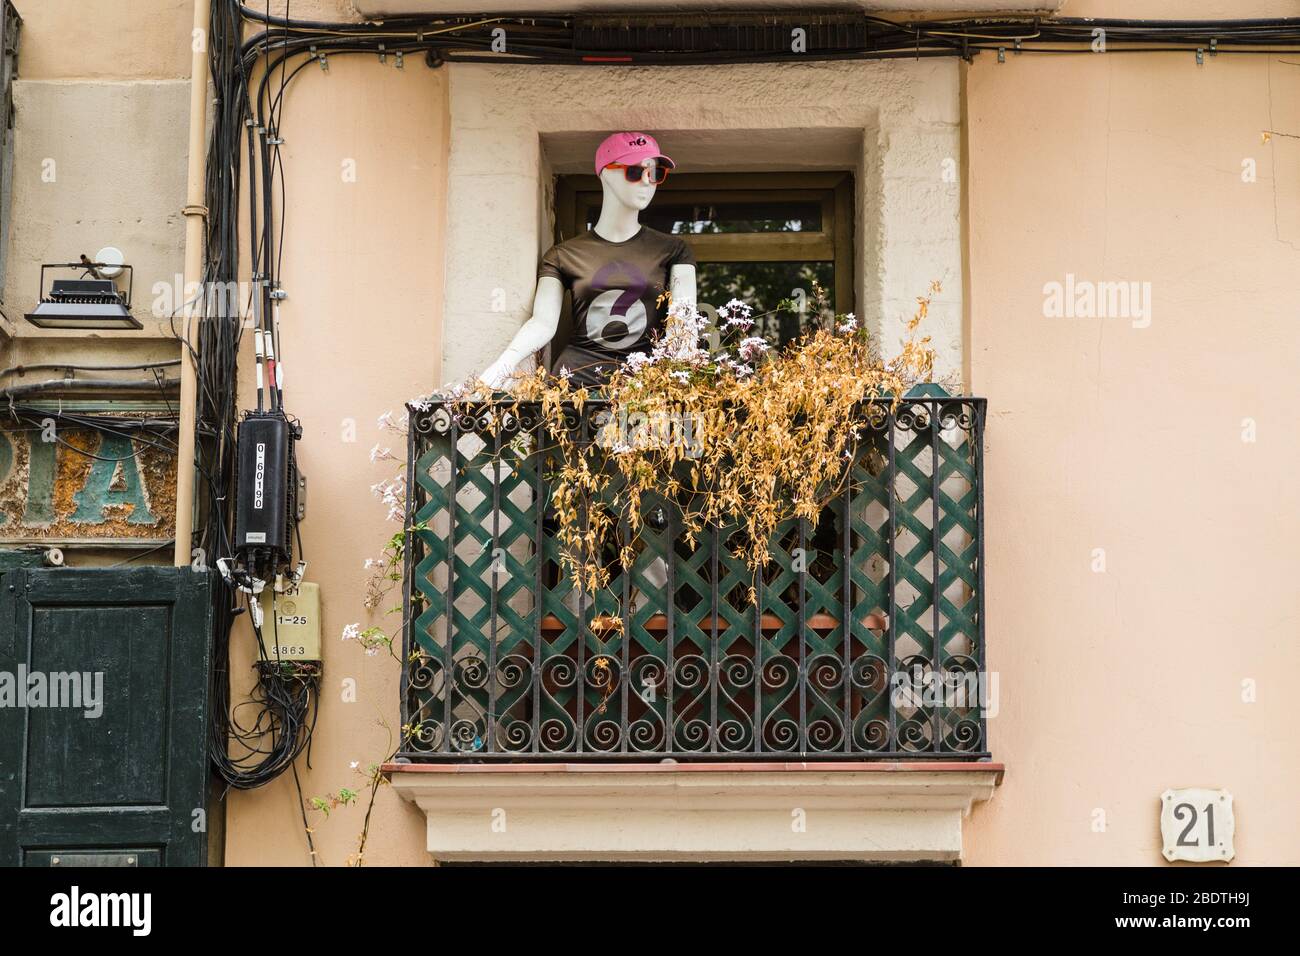 Barcelona balcony decorated with tailor's dummy. Stock Photo